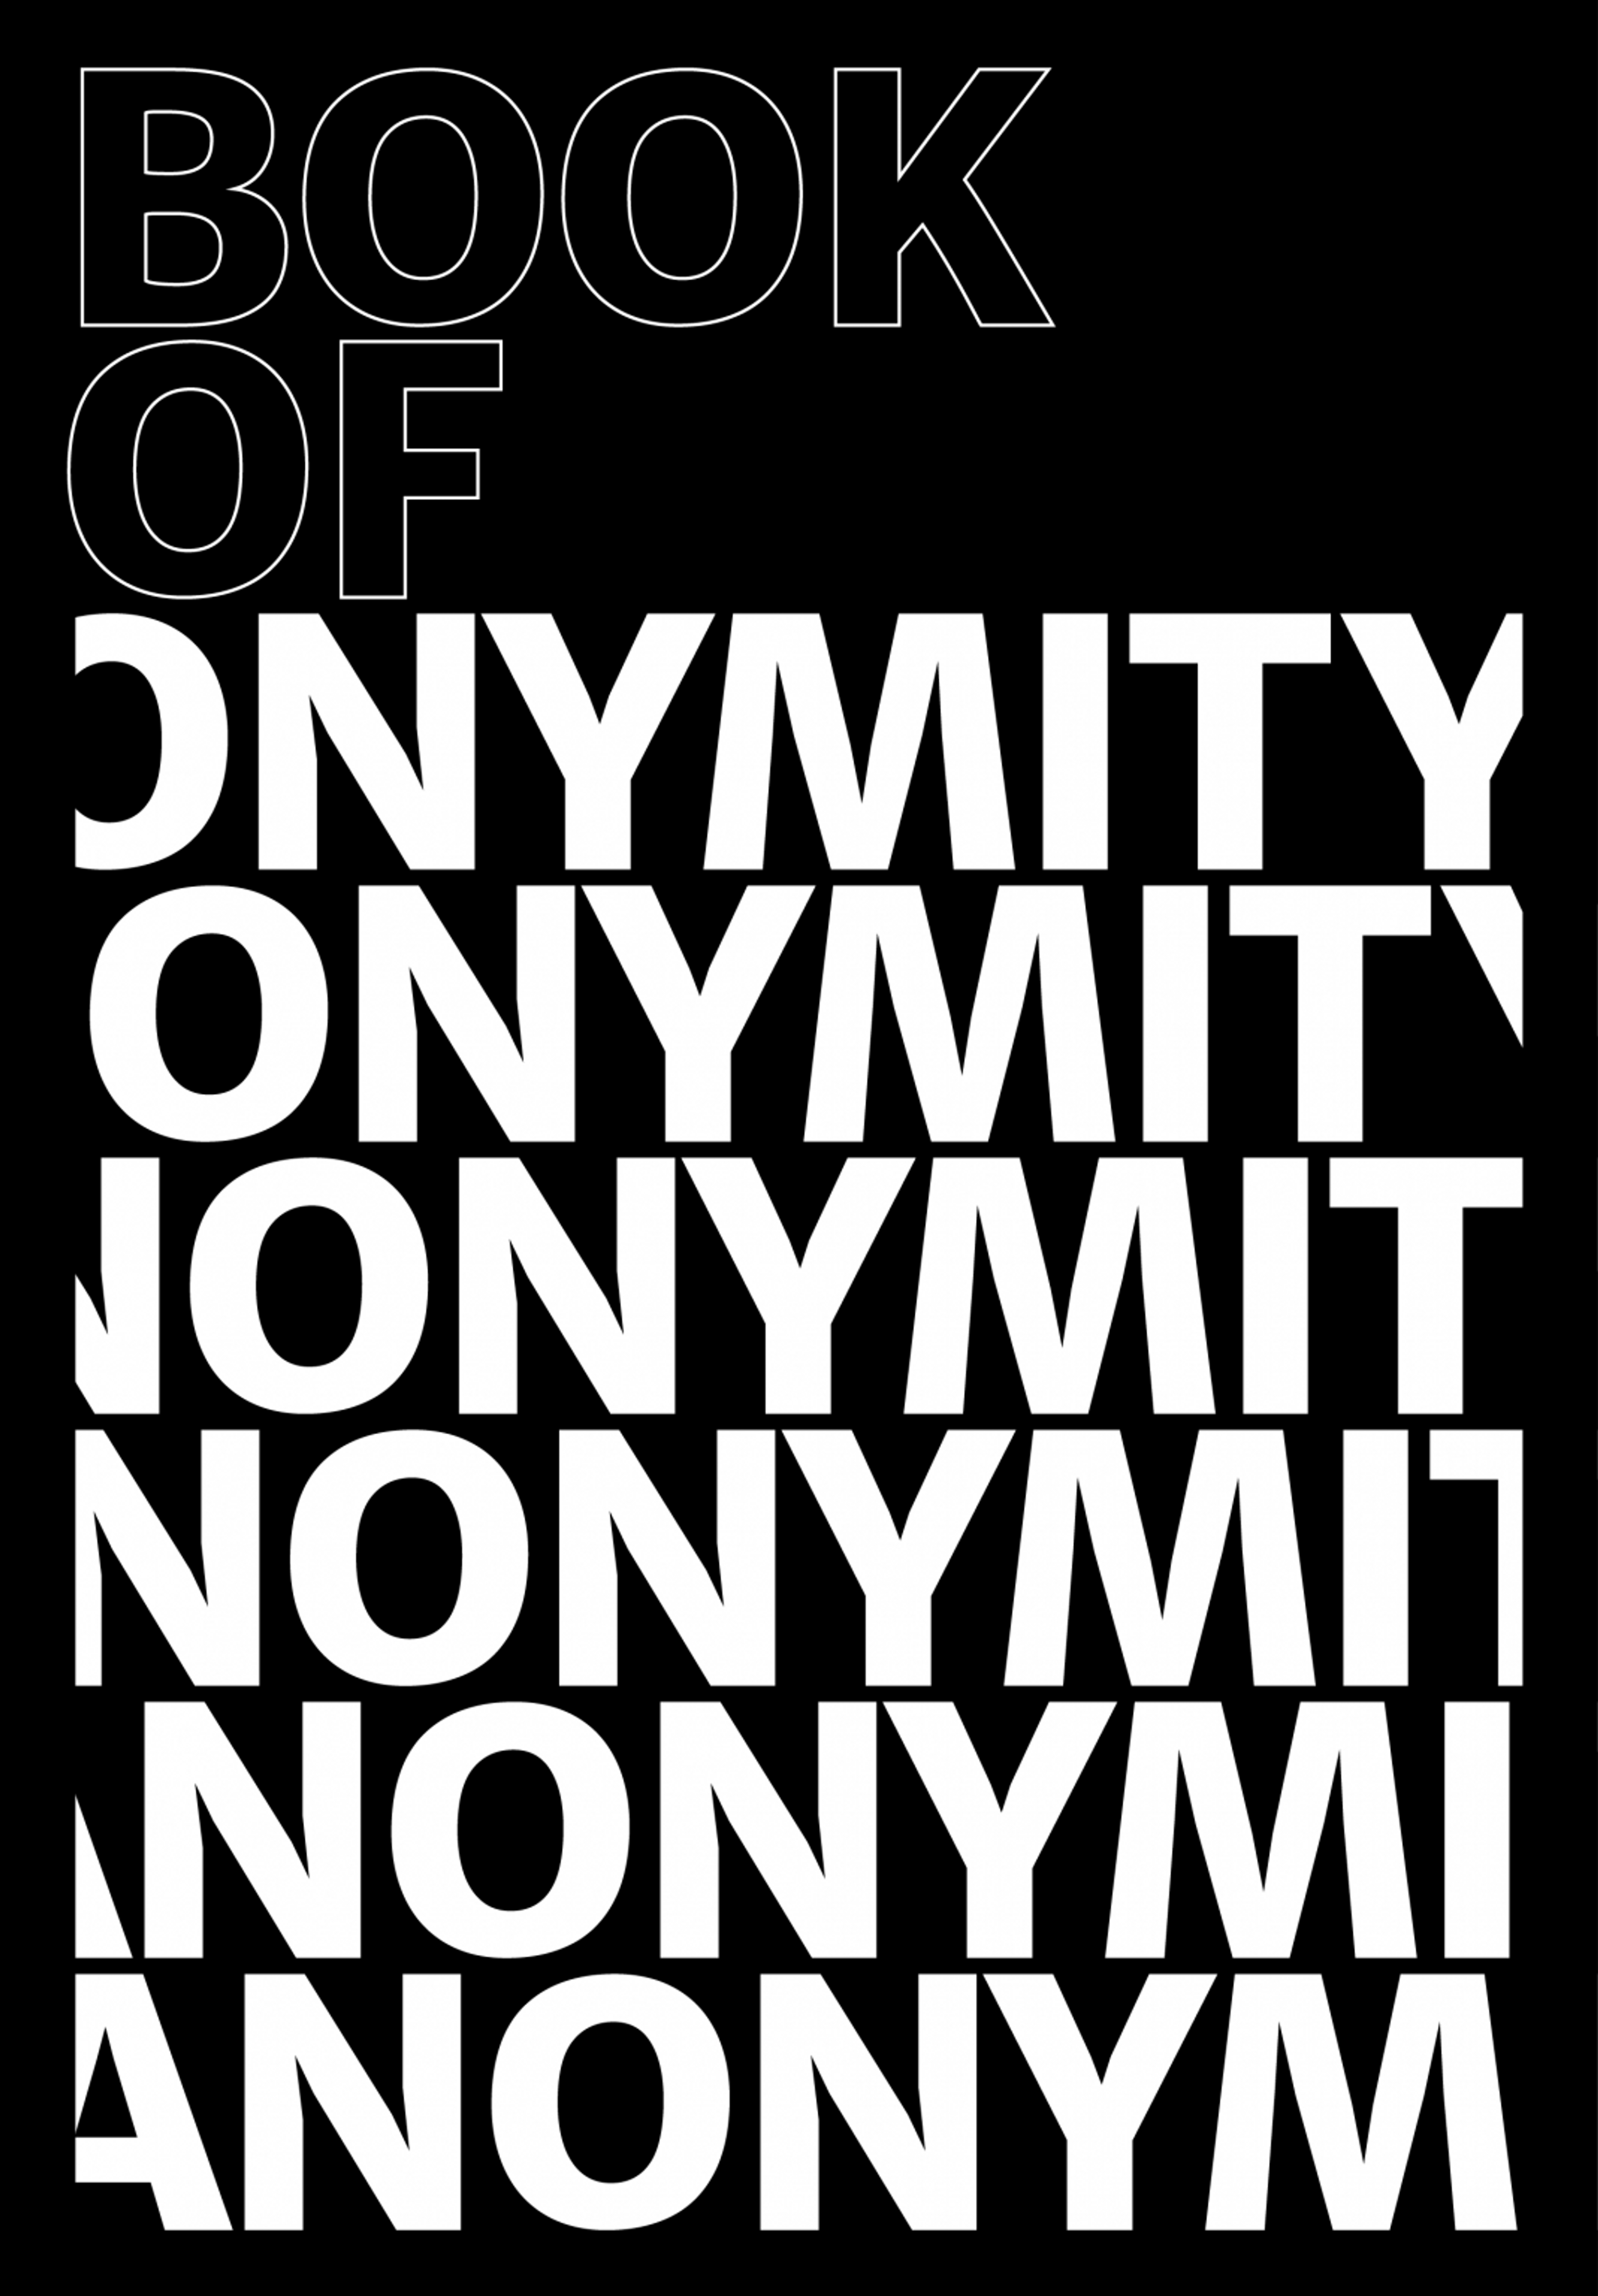 Cover of book titled Book of Anonymity